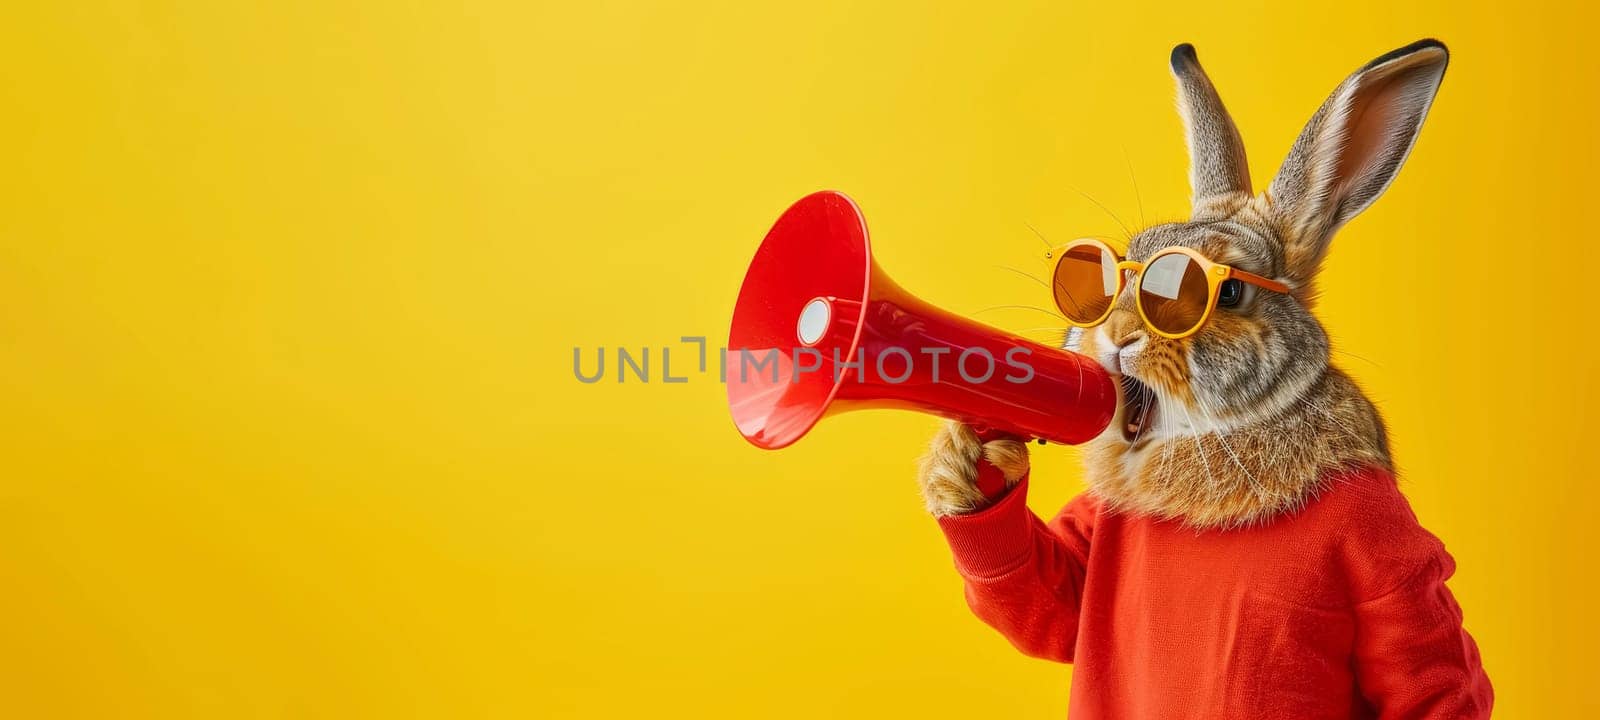 Rabbit Announcing with Megaphone on Yellow by andreyz